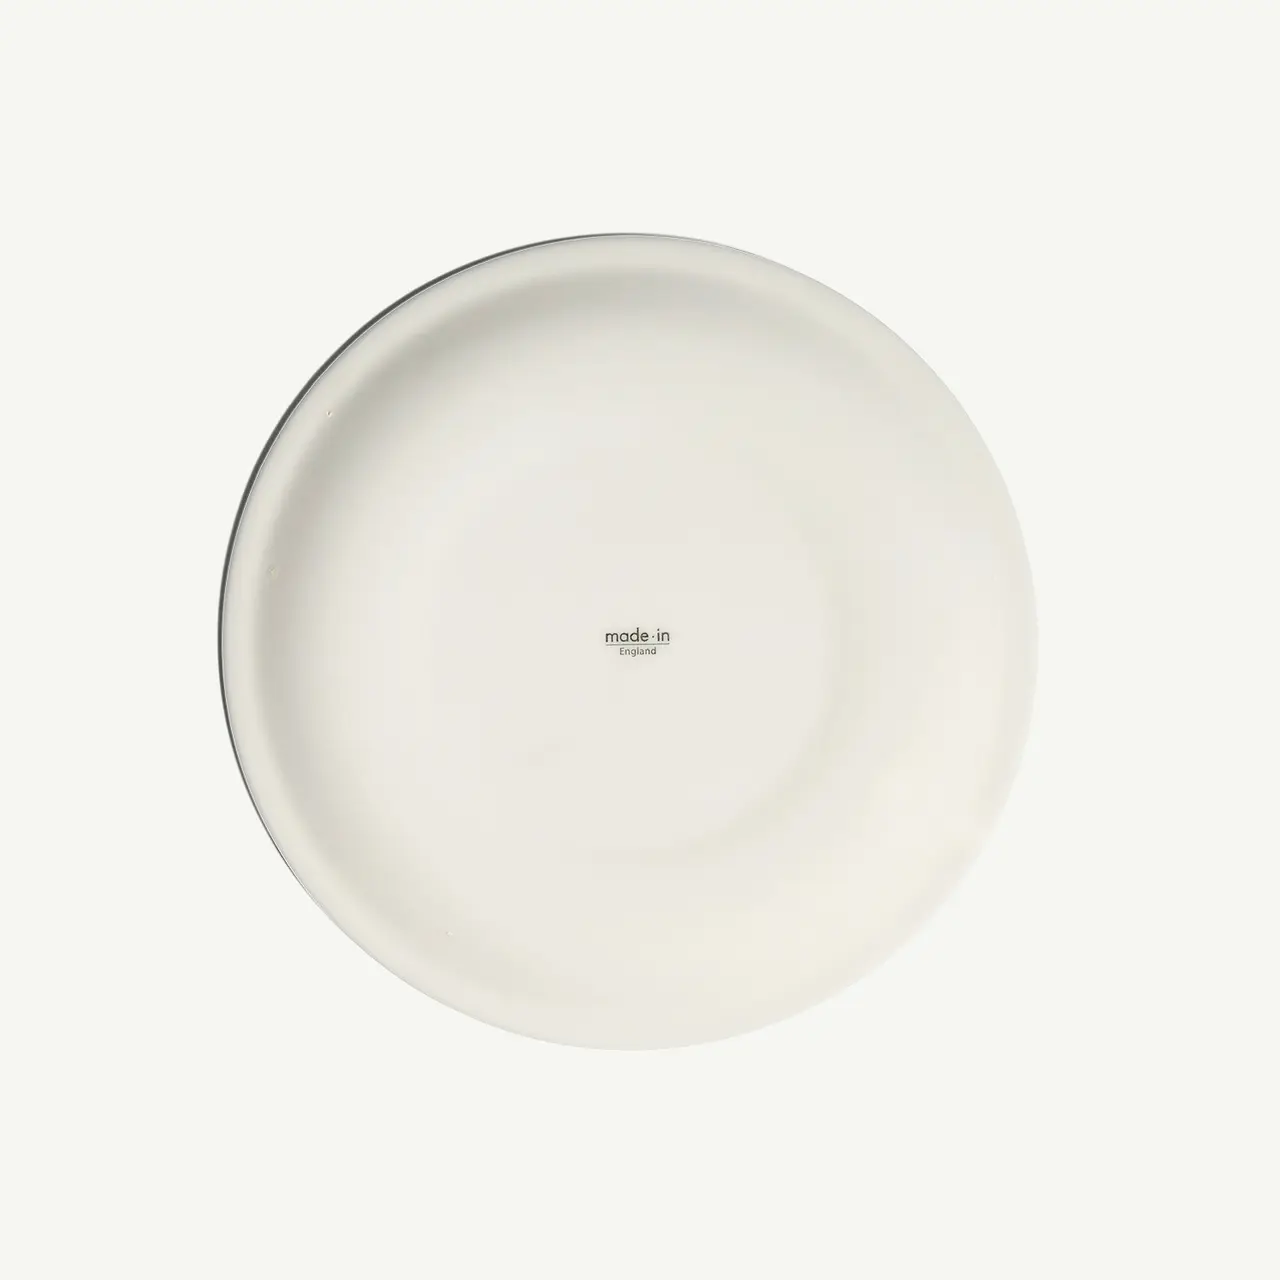 A plain white ceramic plate displayed against a matching background with the text "made in" visible at the center.